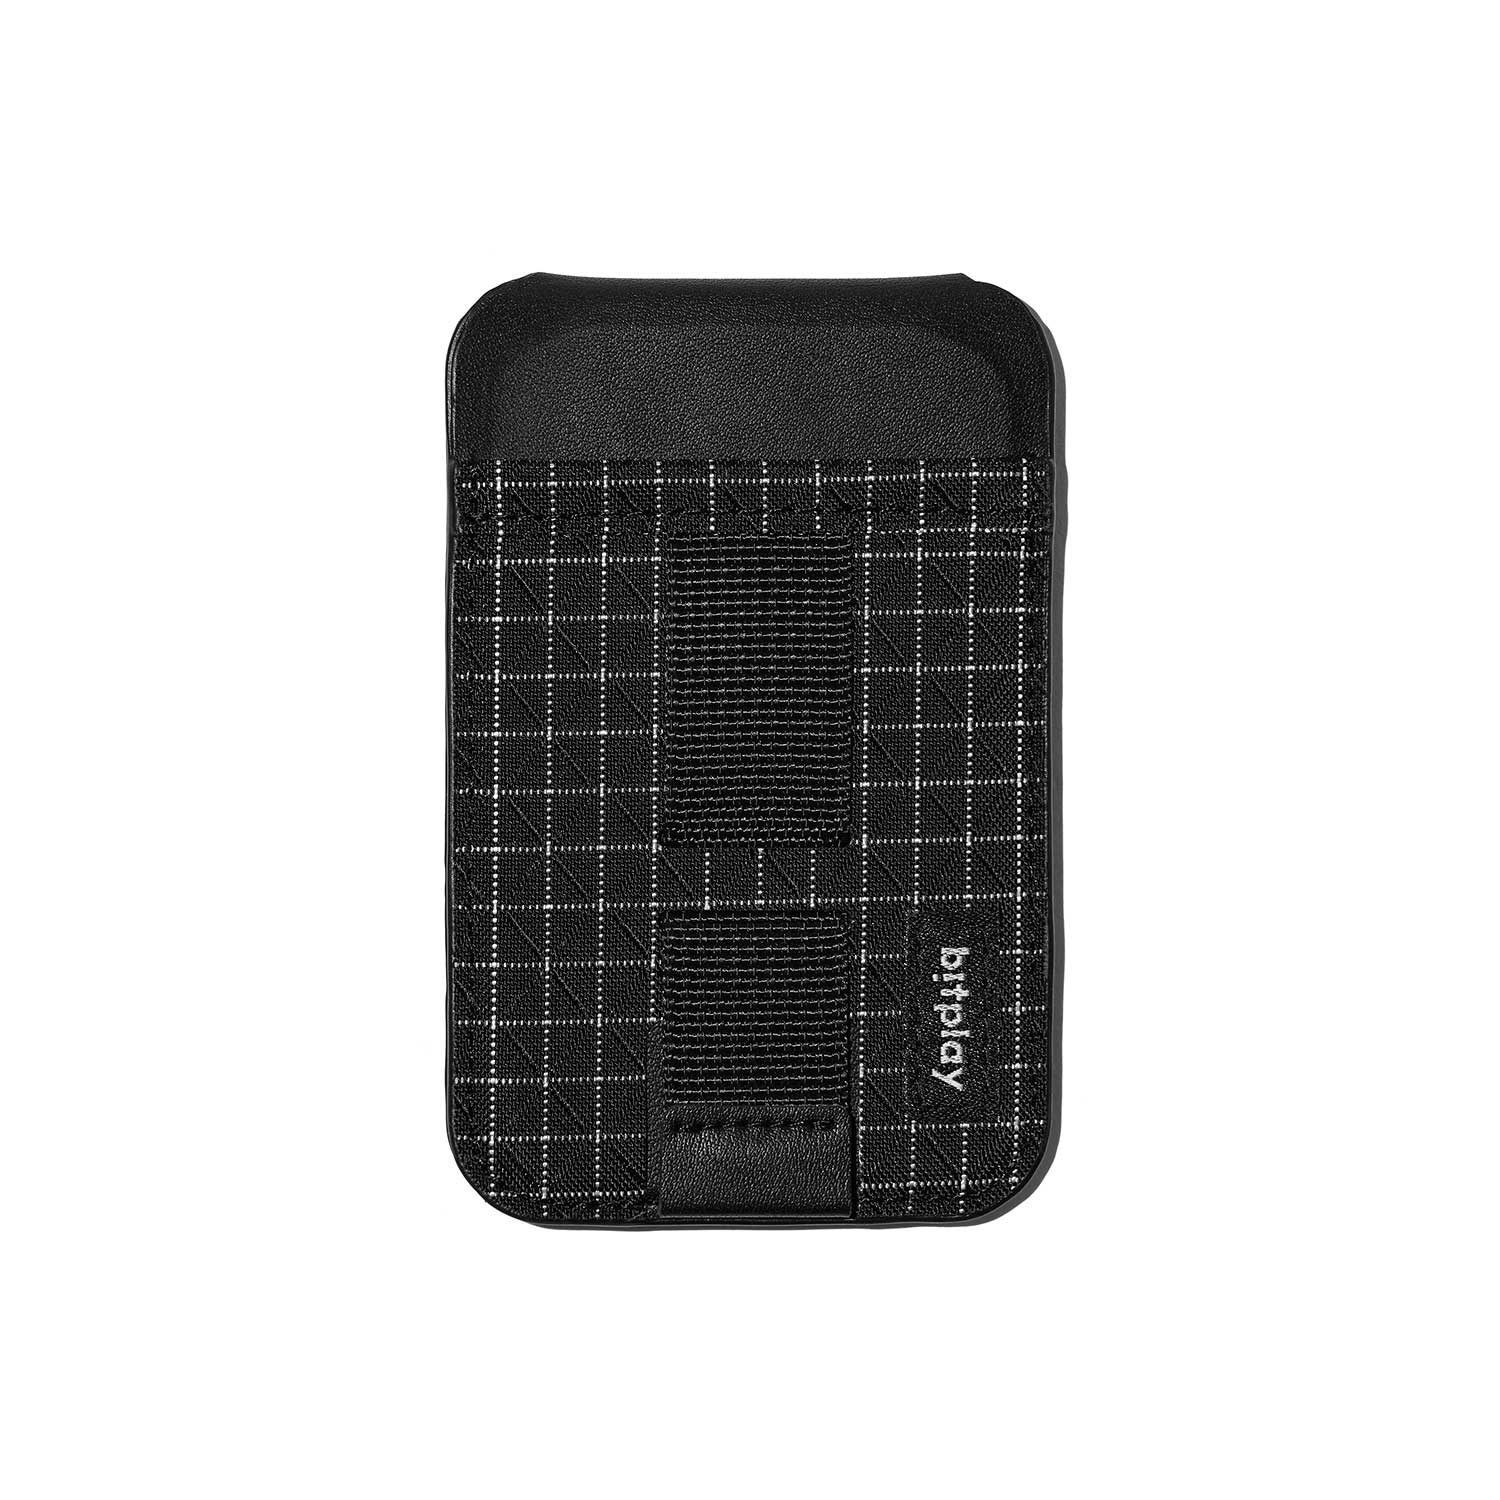 Bitplay Magnetic Wallet Stand V2 Multi-angle Card Holder with Hand-held Woven Strap, Up to 3 Cards